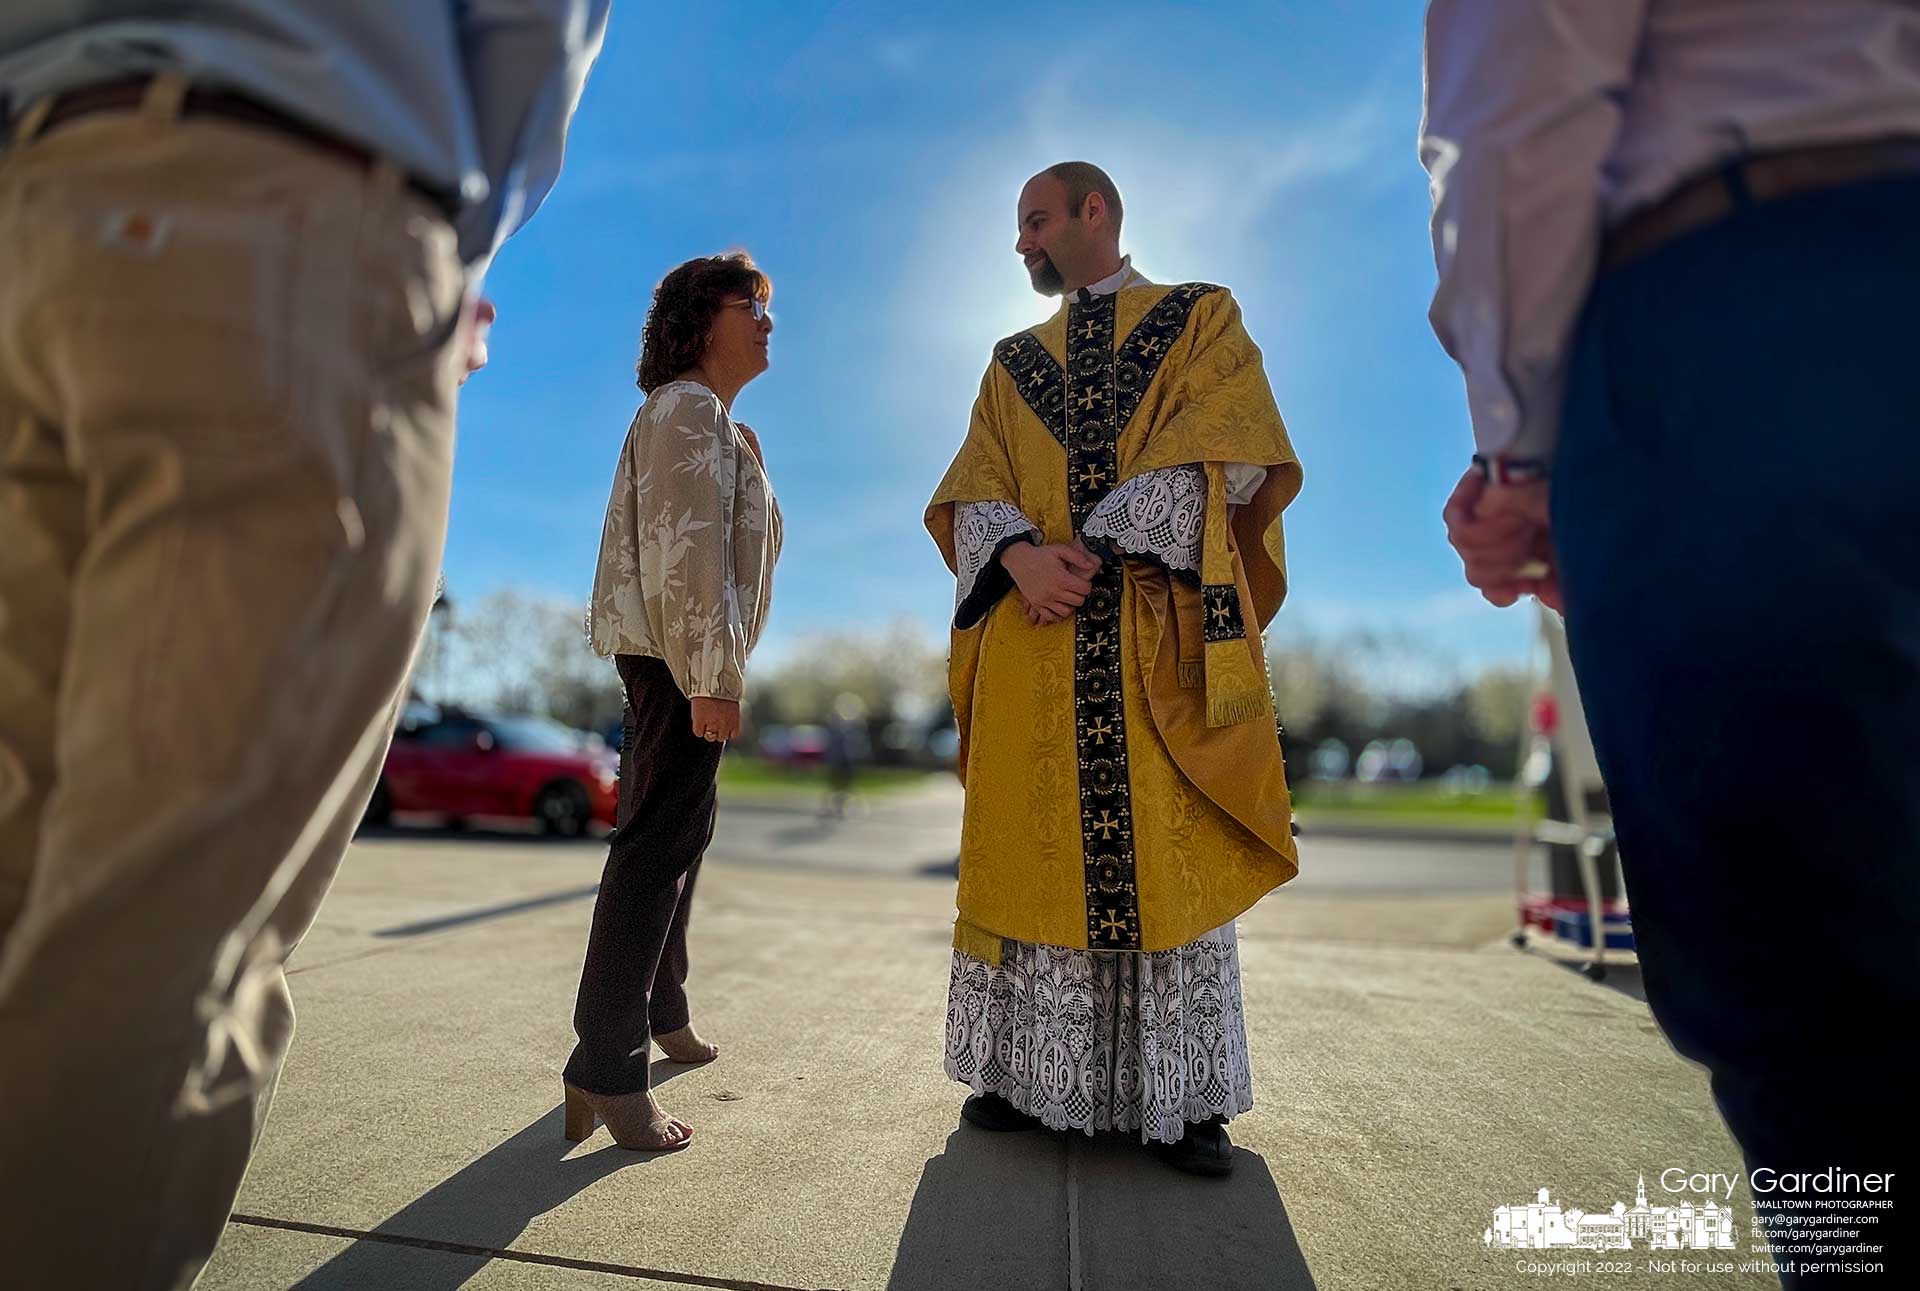 Father PJ Brandimarti talks with a parishioner after early Sunday Mass where he announced he is being transferred to a different parish in July. My Final Photo for April 24, 2022.